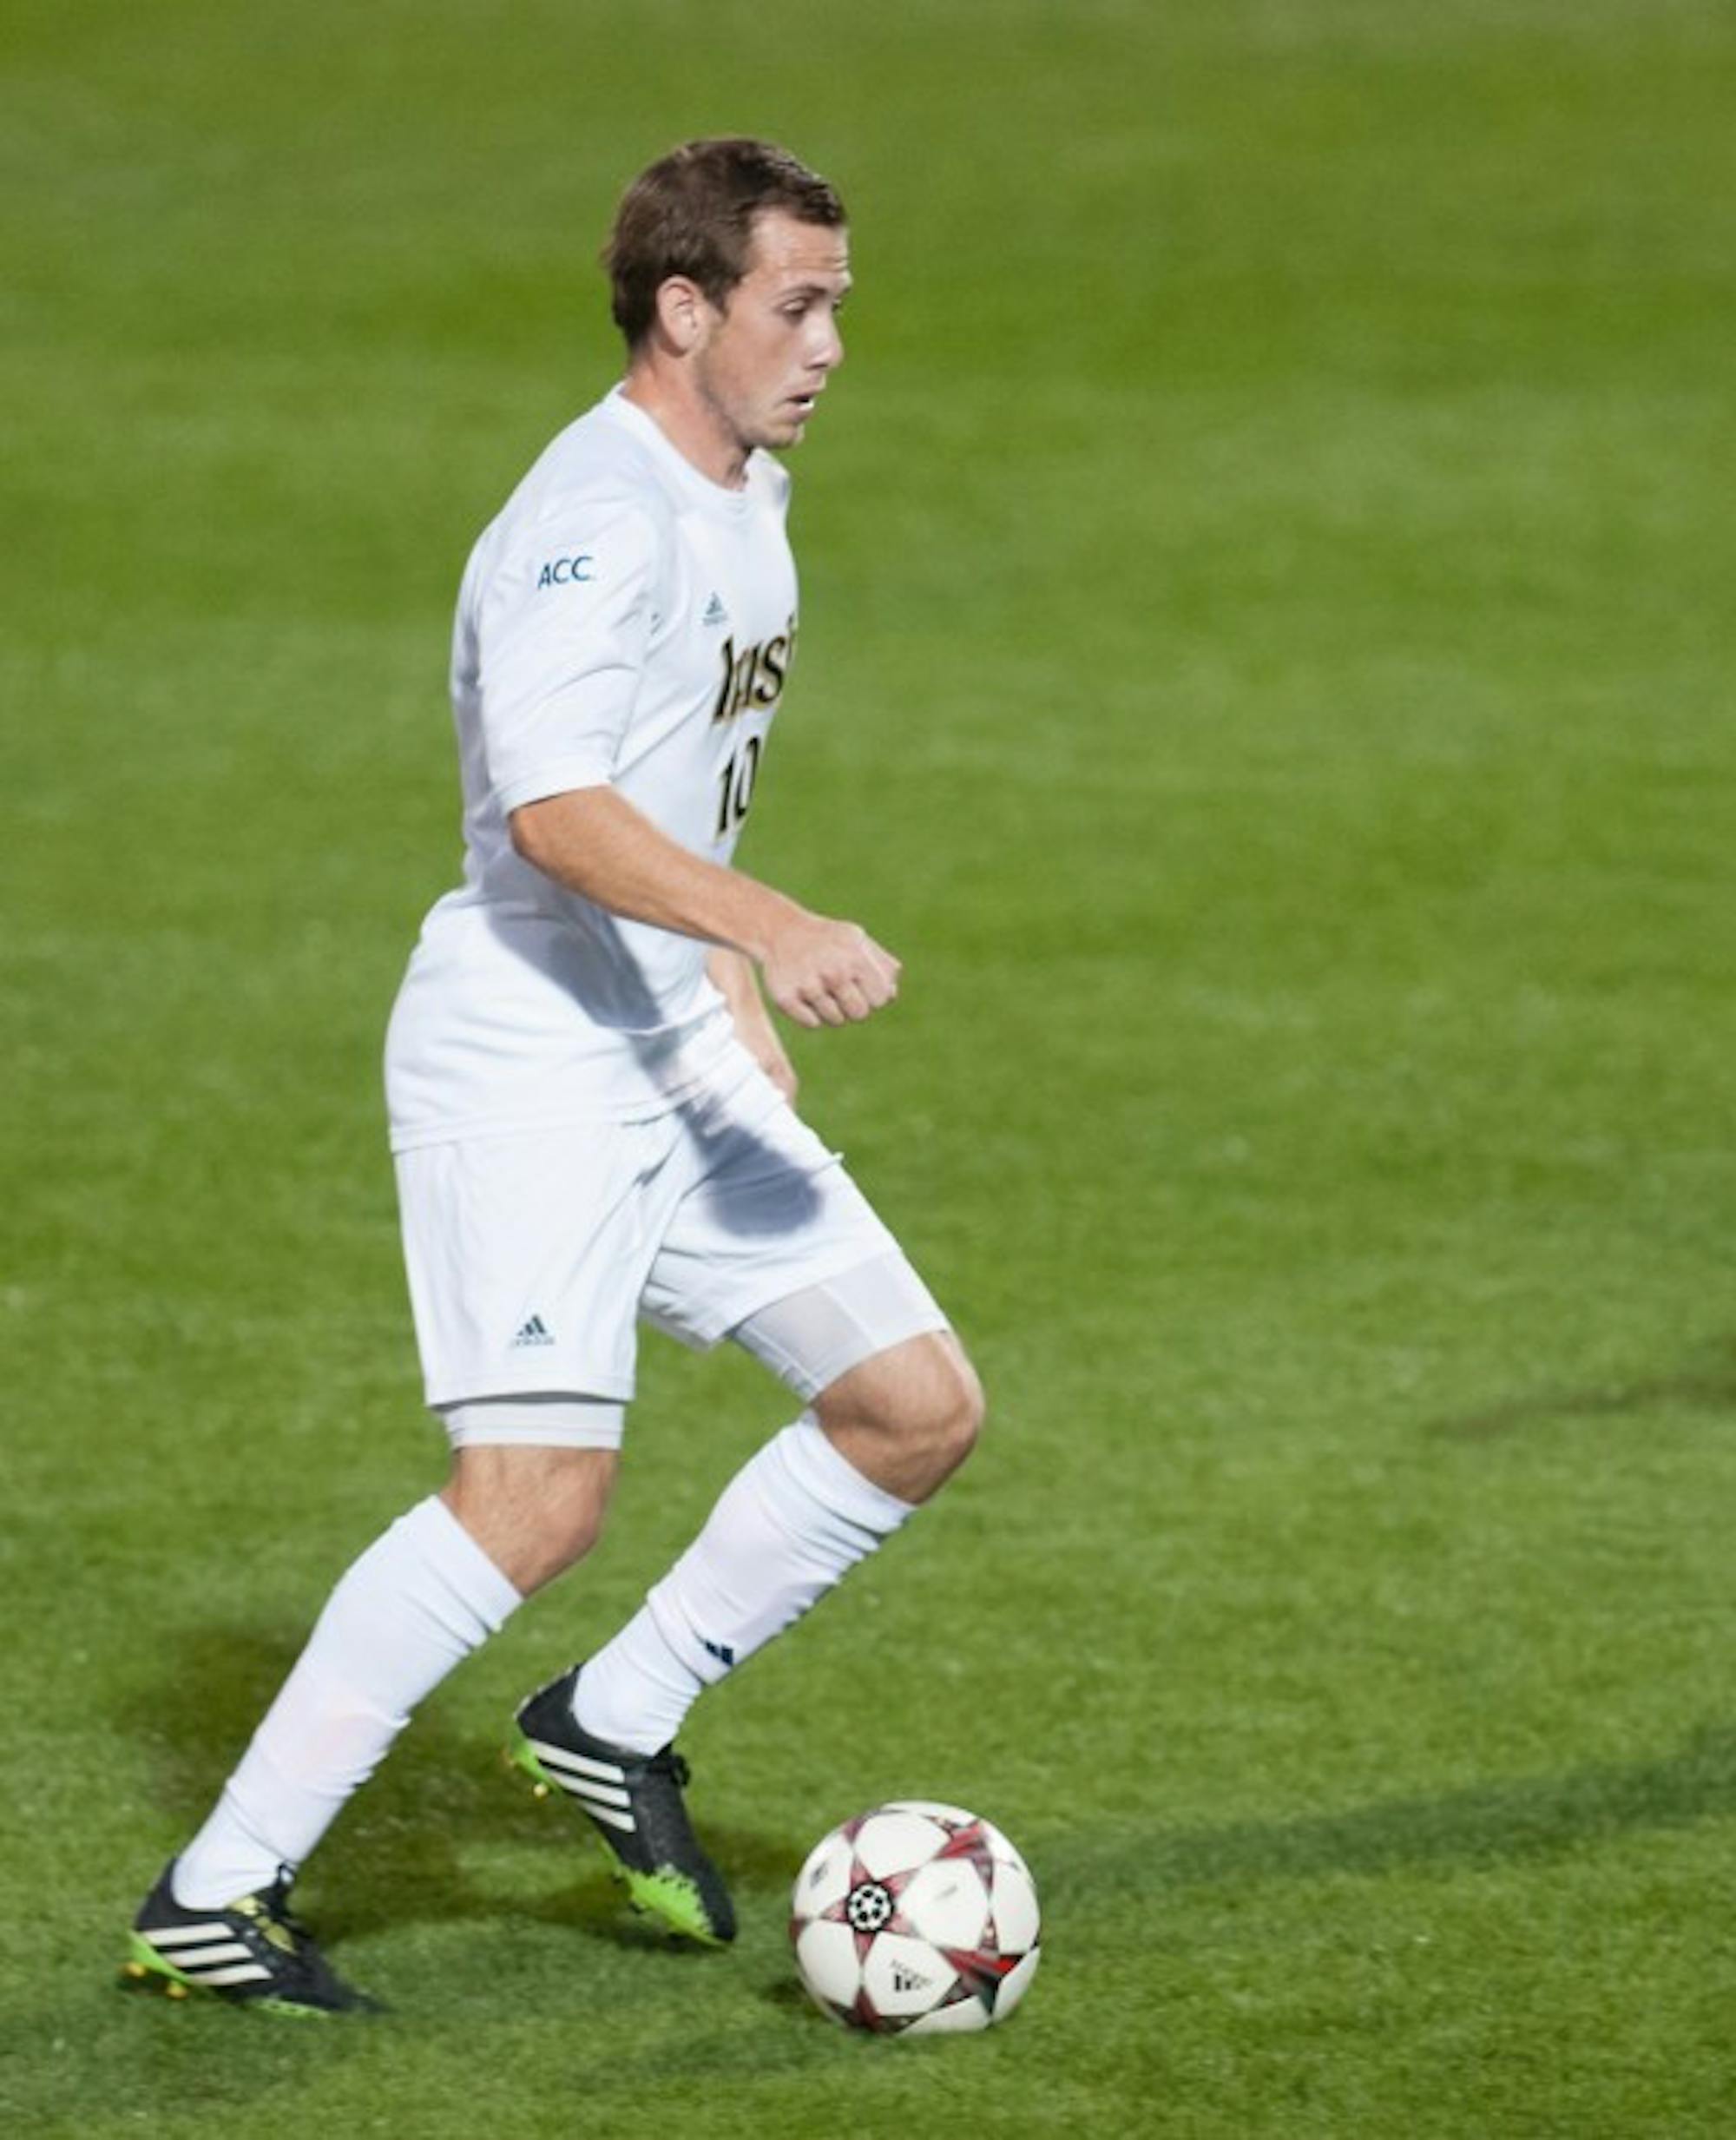 Notre Dame graduate and Chicago Fire midfielder Harry Shipp is finding success in professional soccer.Here Shipp is shown during Notre Dame’s 3-1 win over Duke on Sept. 27, 2013, at Alumni Stadium.